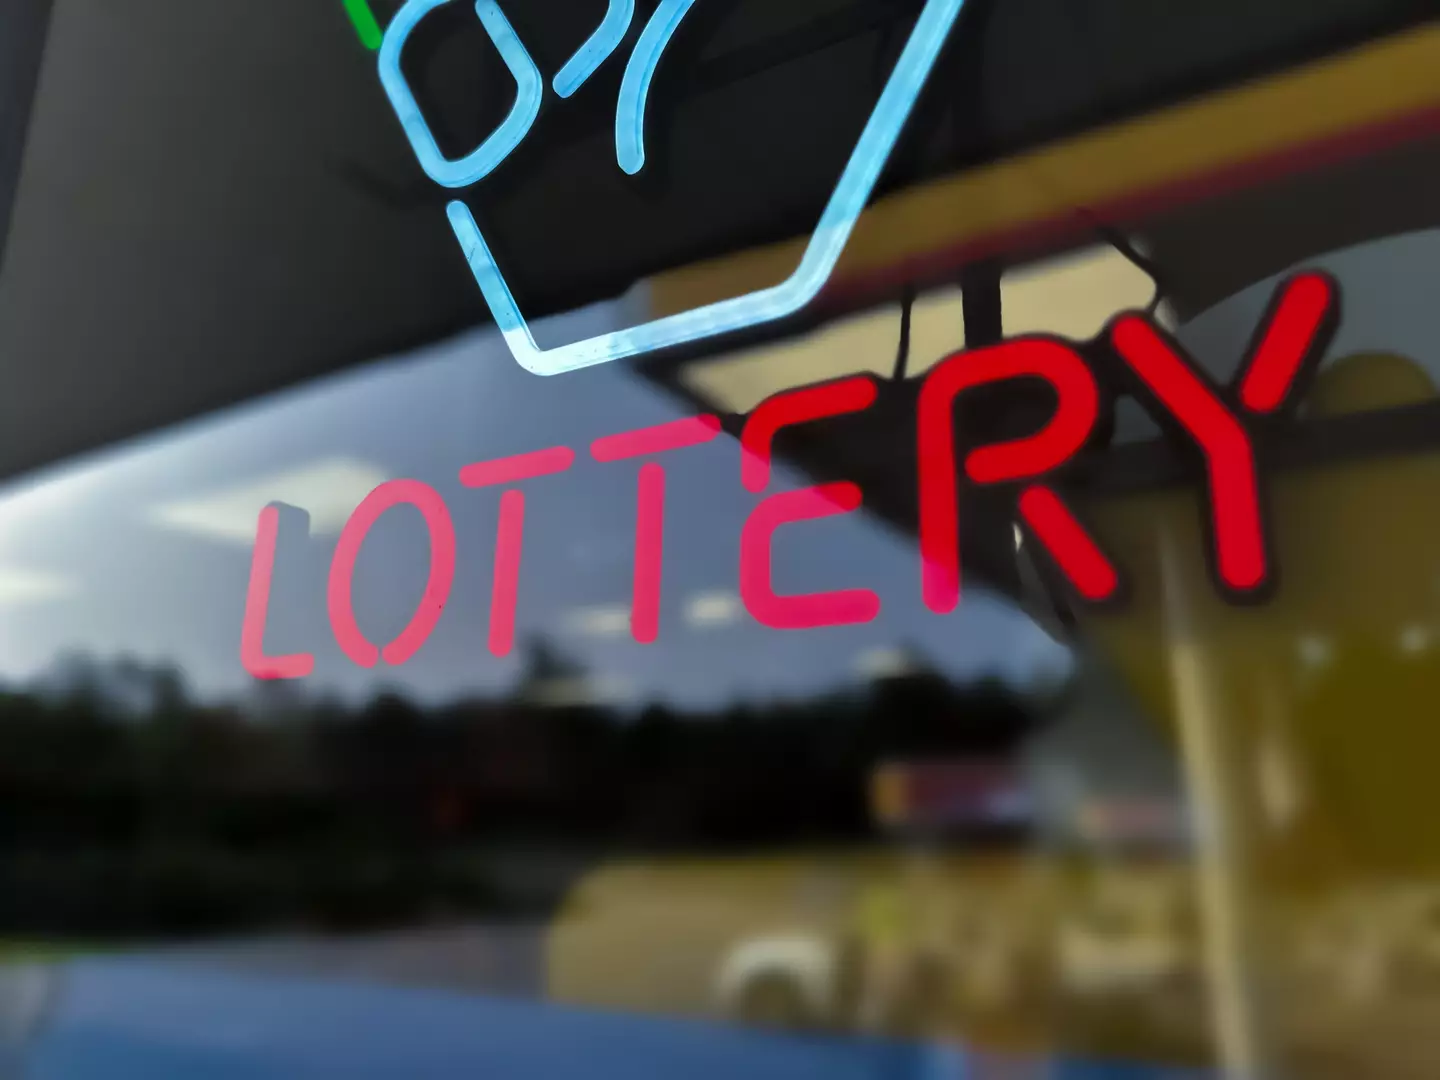 Four students have won millions on the lottery.